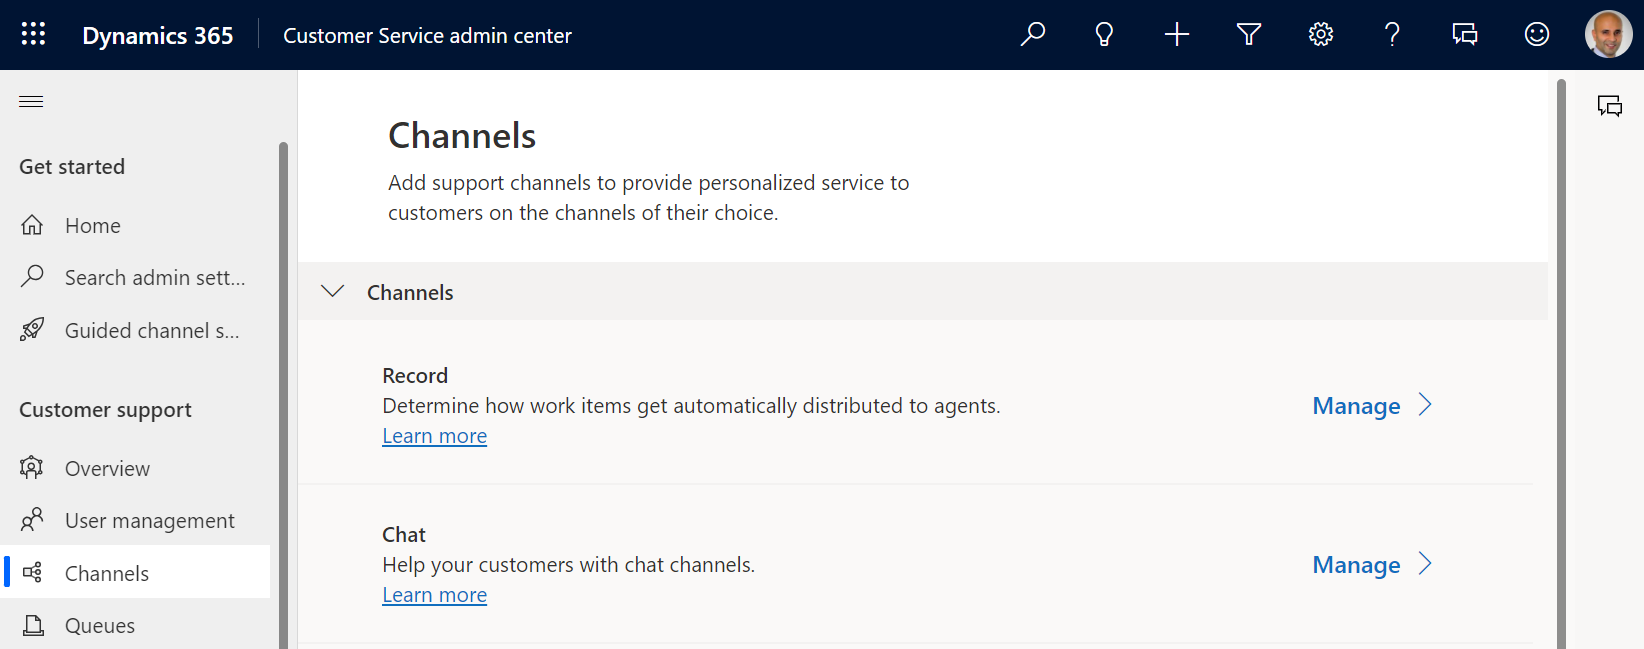 How to Use the Live Chat Widget 2.0 in Customer Service Workspace